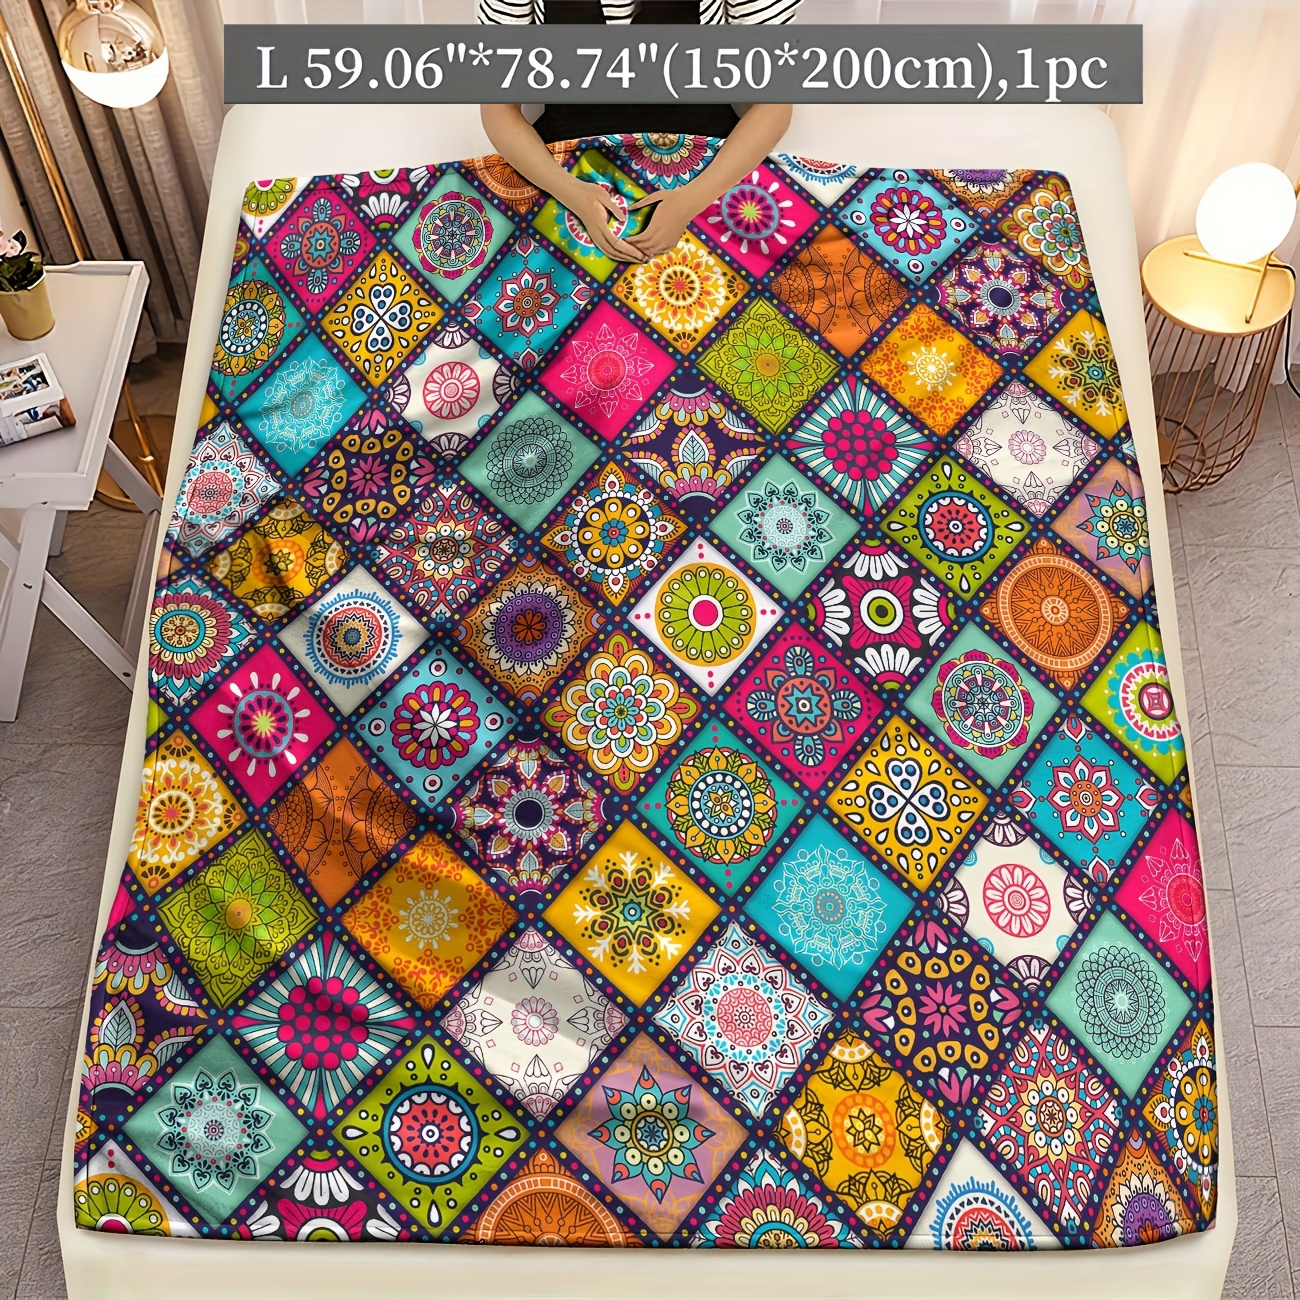 

1pc Bohemian Pattern Hd Digital Printing Flannel Blanket, Soft Warm Throw Blanket Nap Blanket For Couch Sofa Office Bed Camping Travel, Multi-purpose Gift Blanket For All Season